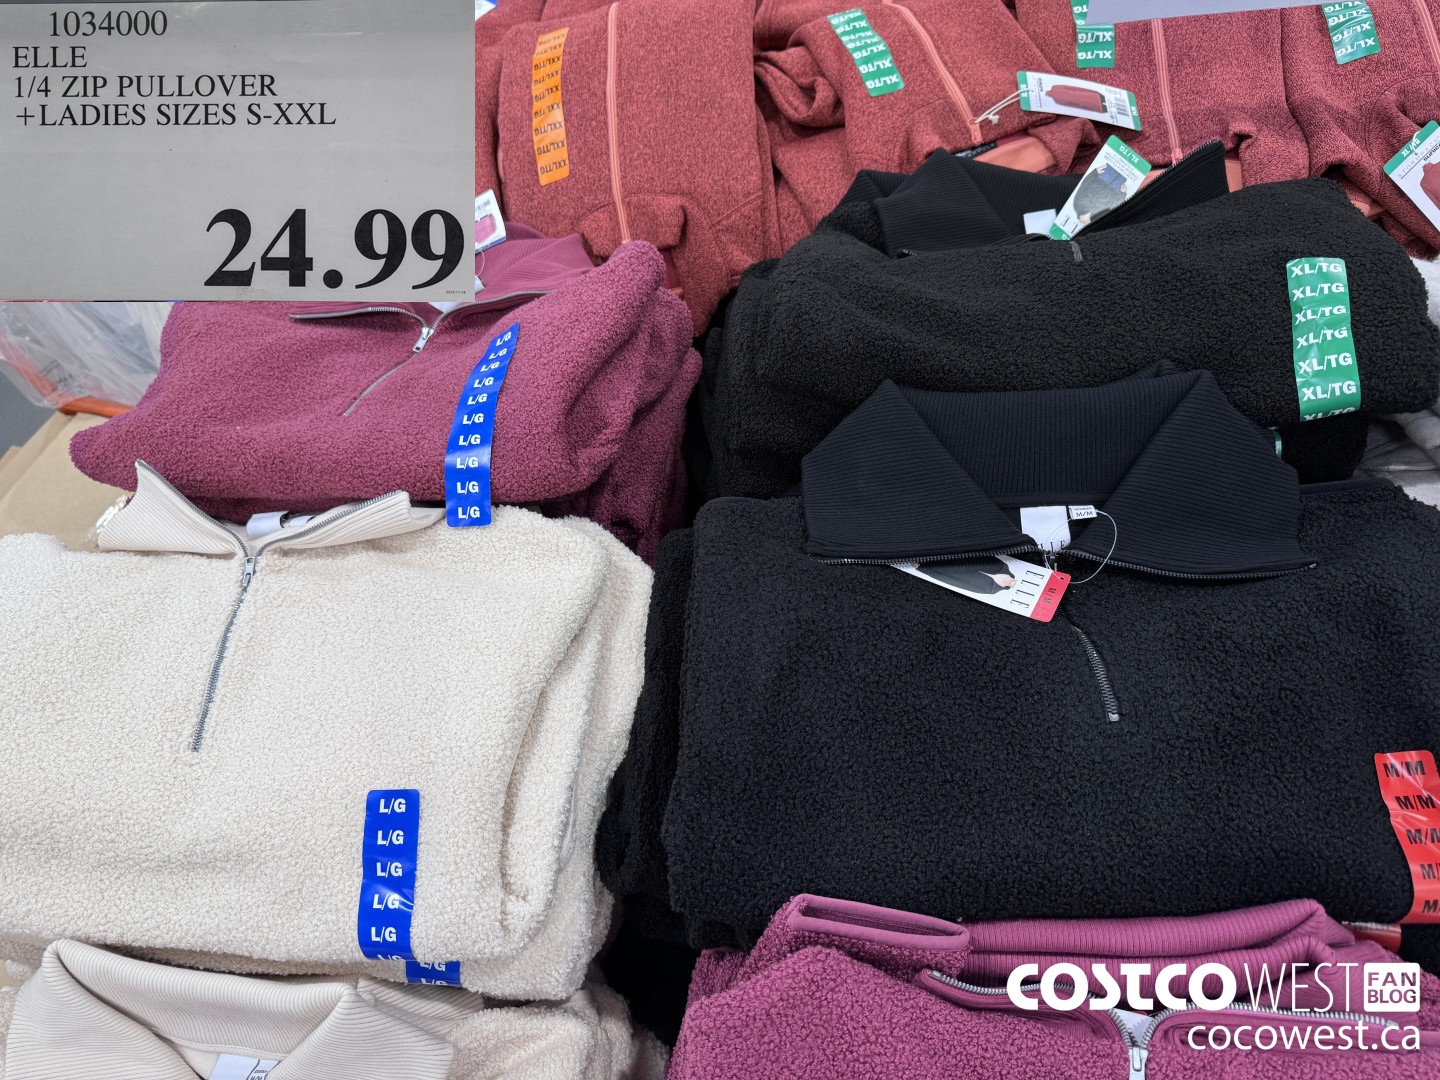 Which would you pick? Comparing the $13.99 Zip pullover at Costco